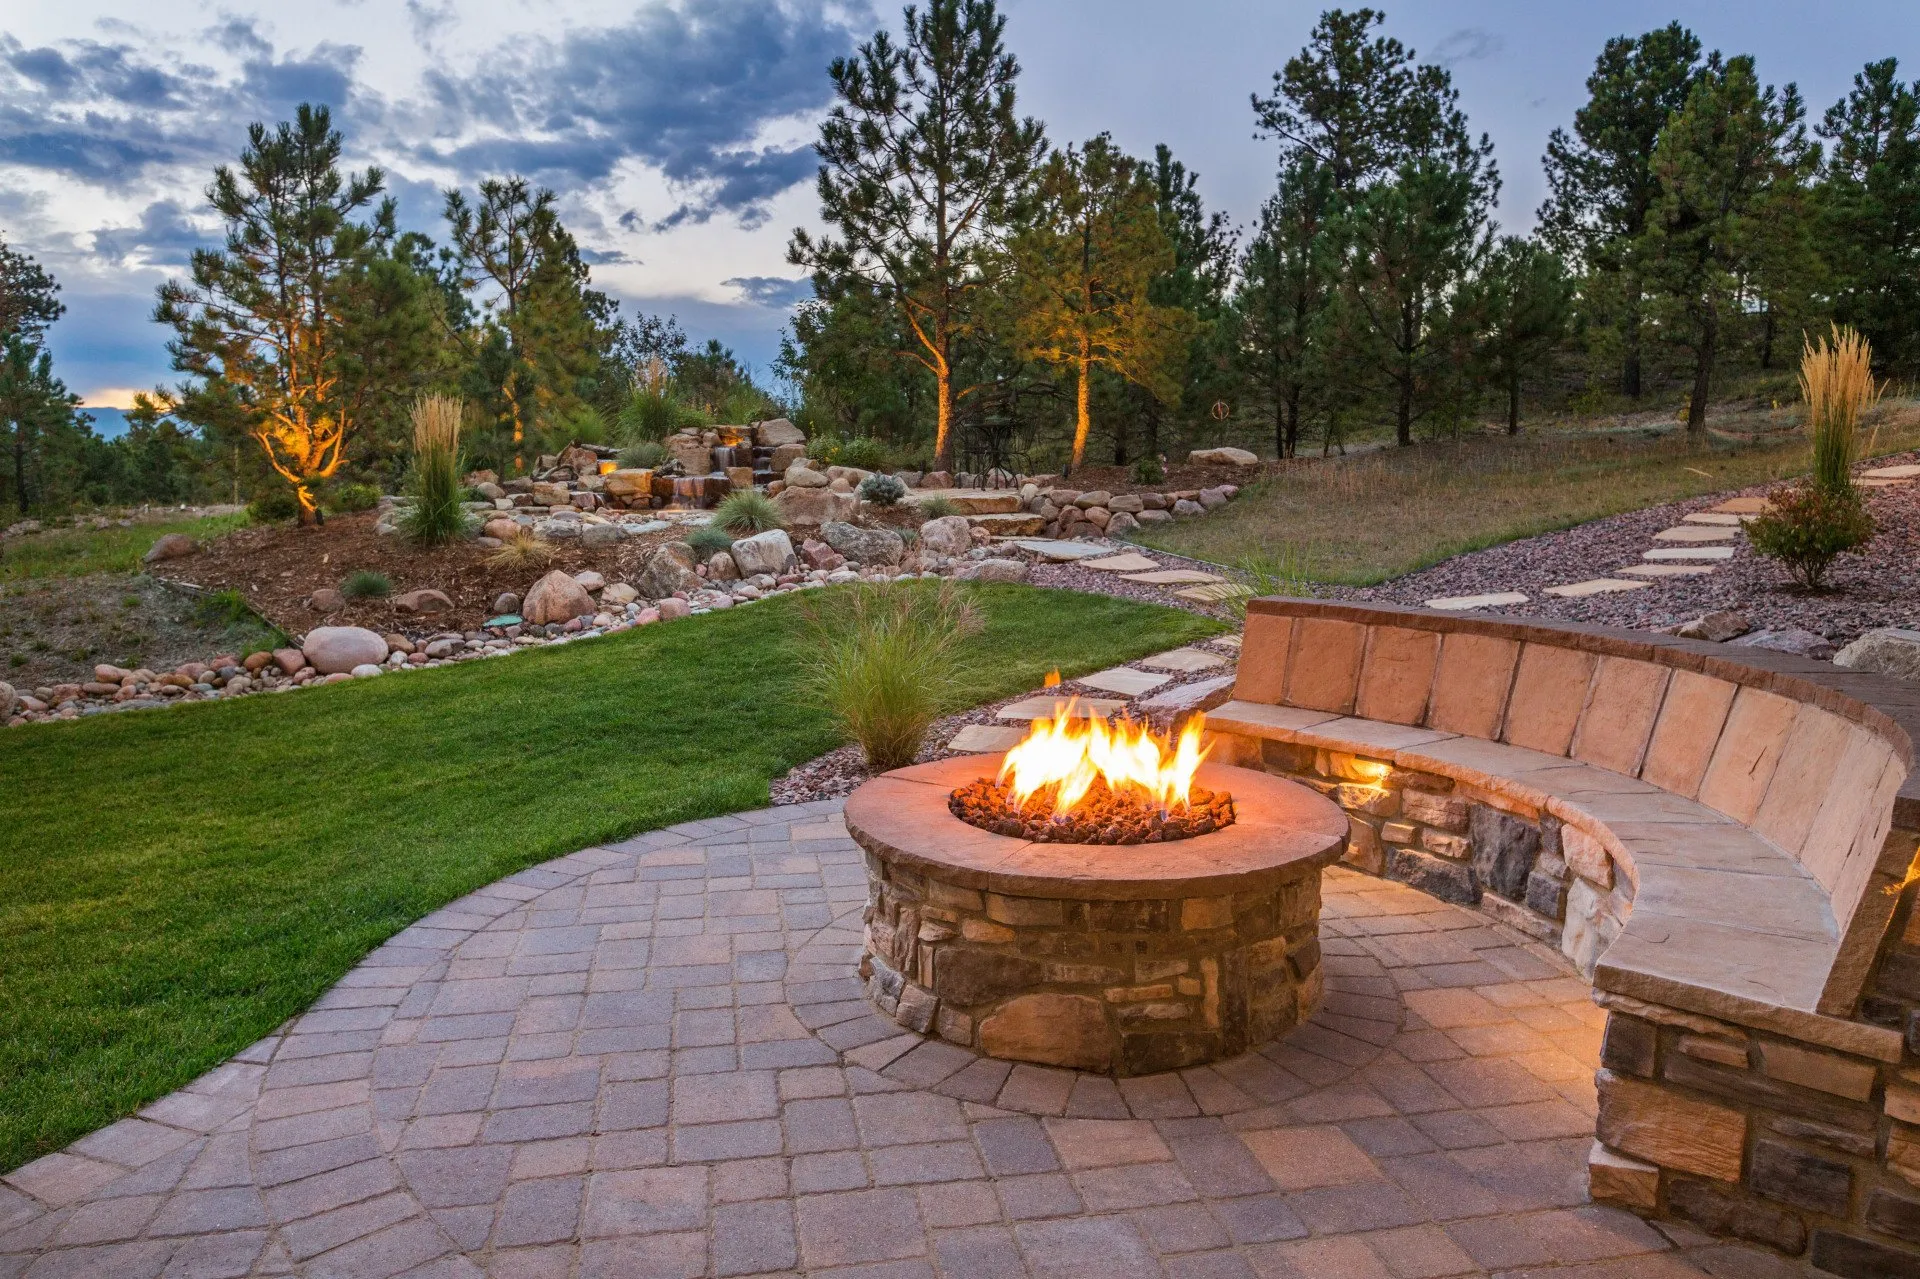 Benefits of Adding an Outdoor Patio to Your Home